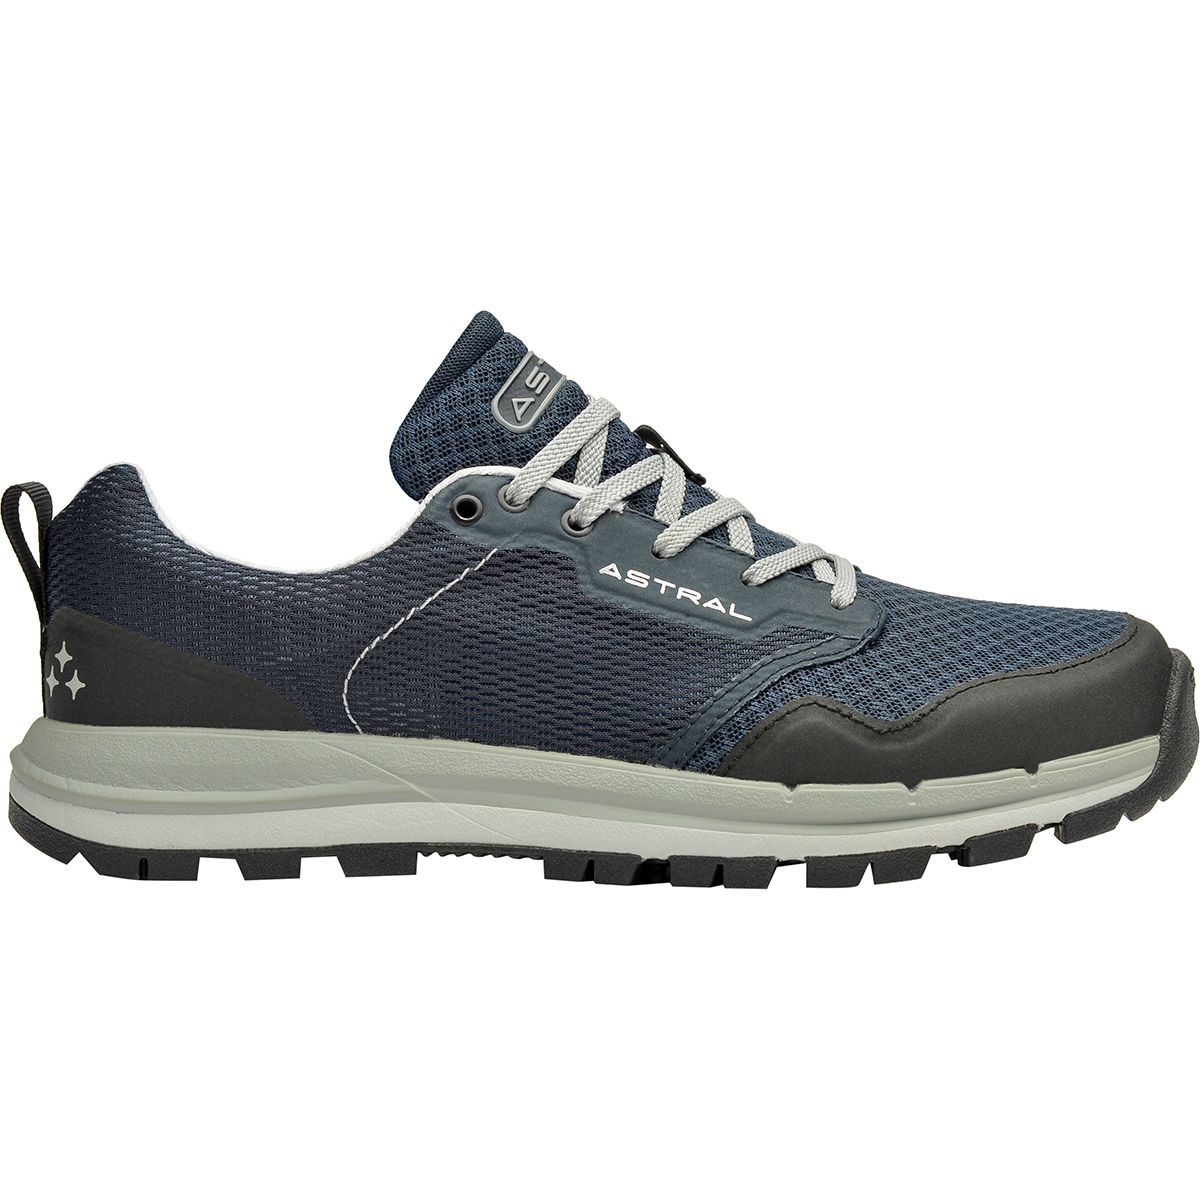 Astral Womens TR1 Mesh Minimalist Hiking Shoes Made for Water and Trails Quick Drying and Lightweight 